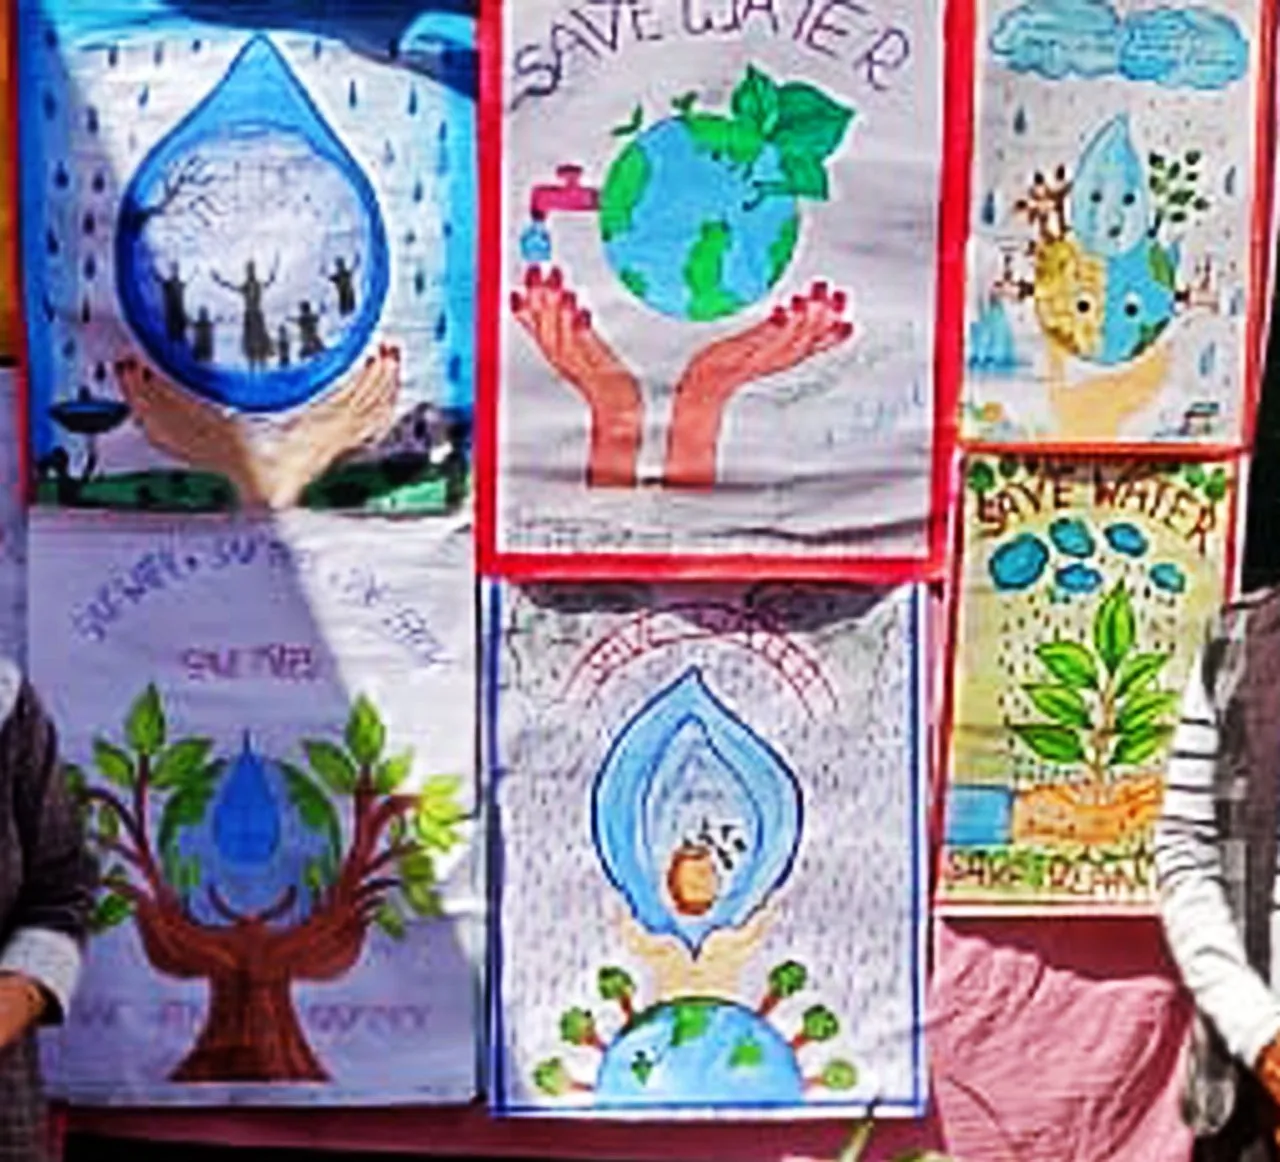 how to draw save water poster drawing || save water save earth drawing for  kids - YouTube | Save water poster drawing, Save earth drawing, Earth  drawings